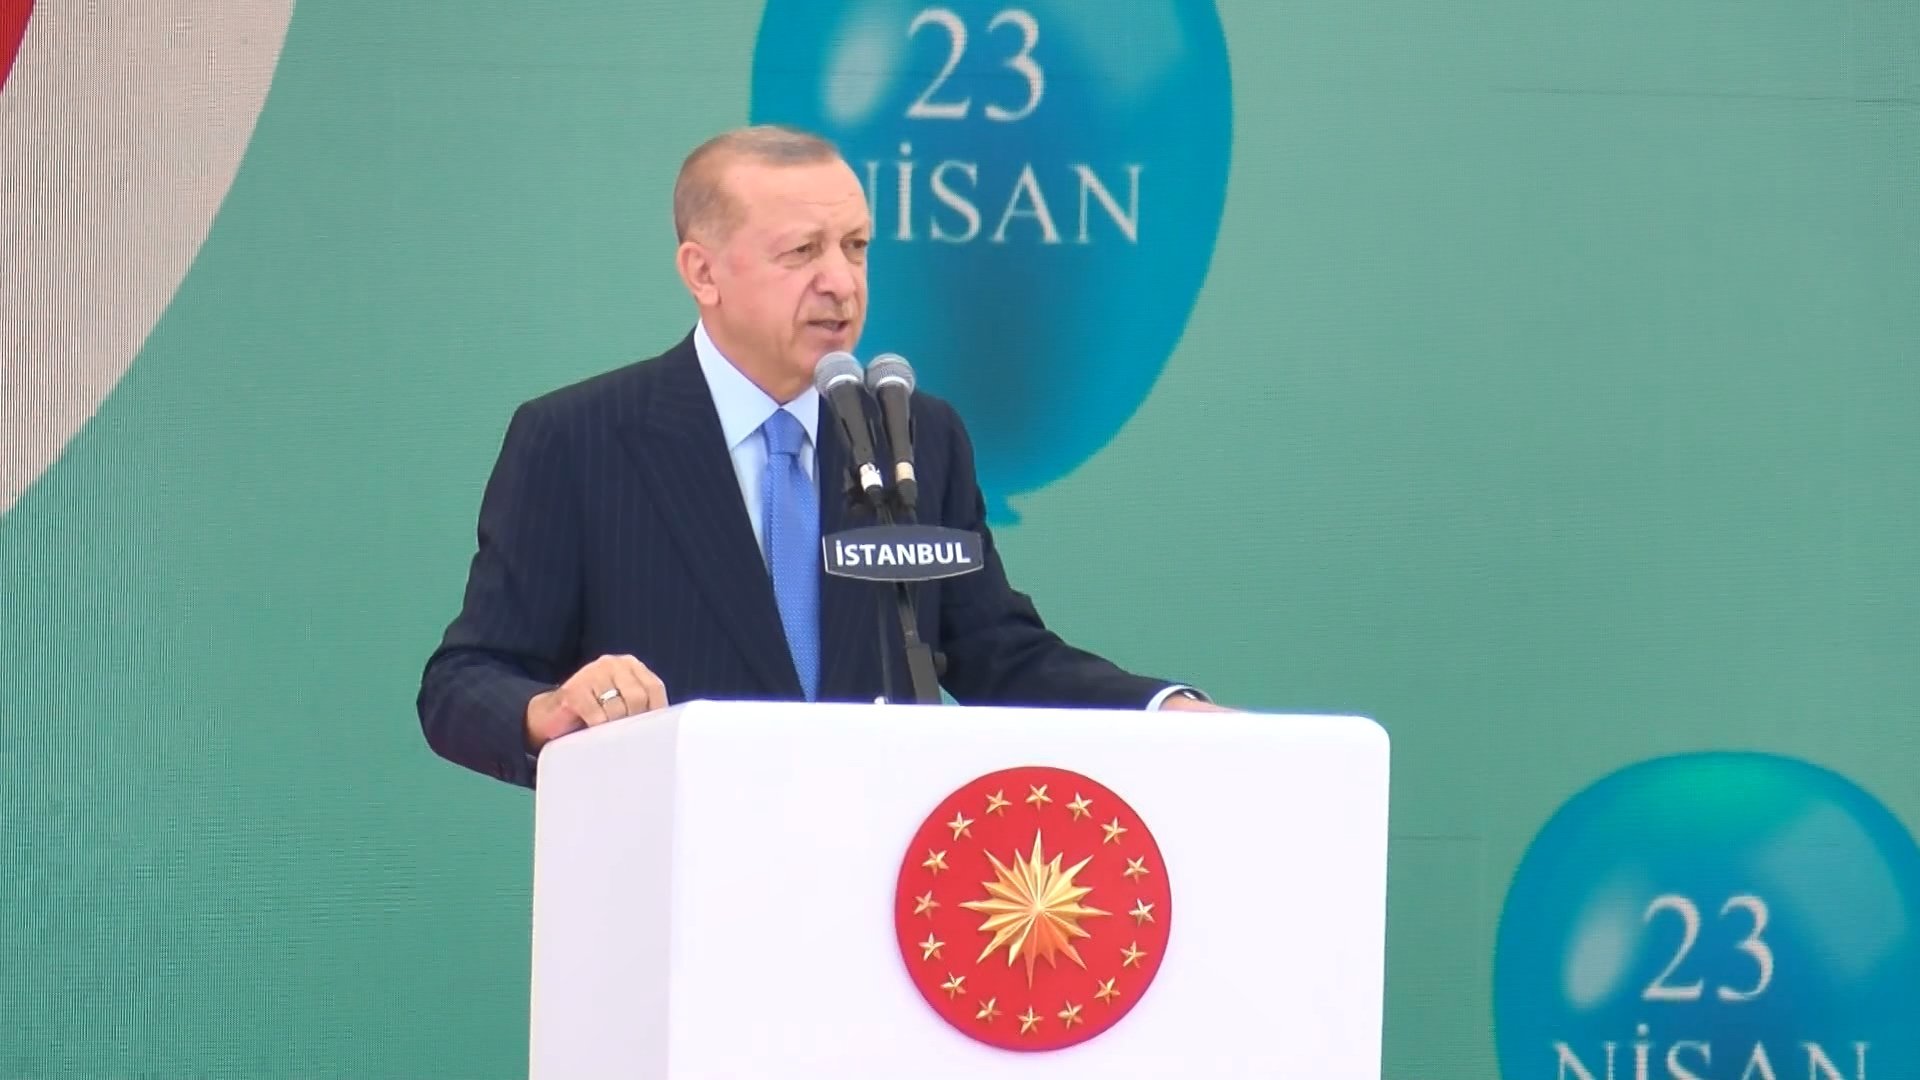 The President of Turkey Recep Tayyip Erdoğan giving his speech on the occasion of National Sovereignty and Children's Day, Başakşehir, Istanbul, Turkey, April 23, 2022. (DHA Photo)